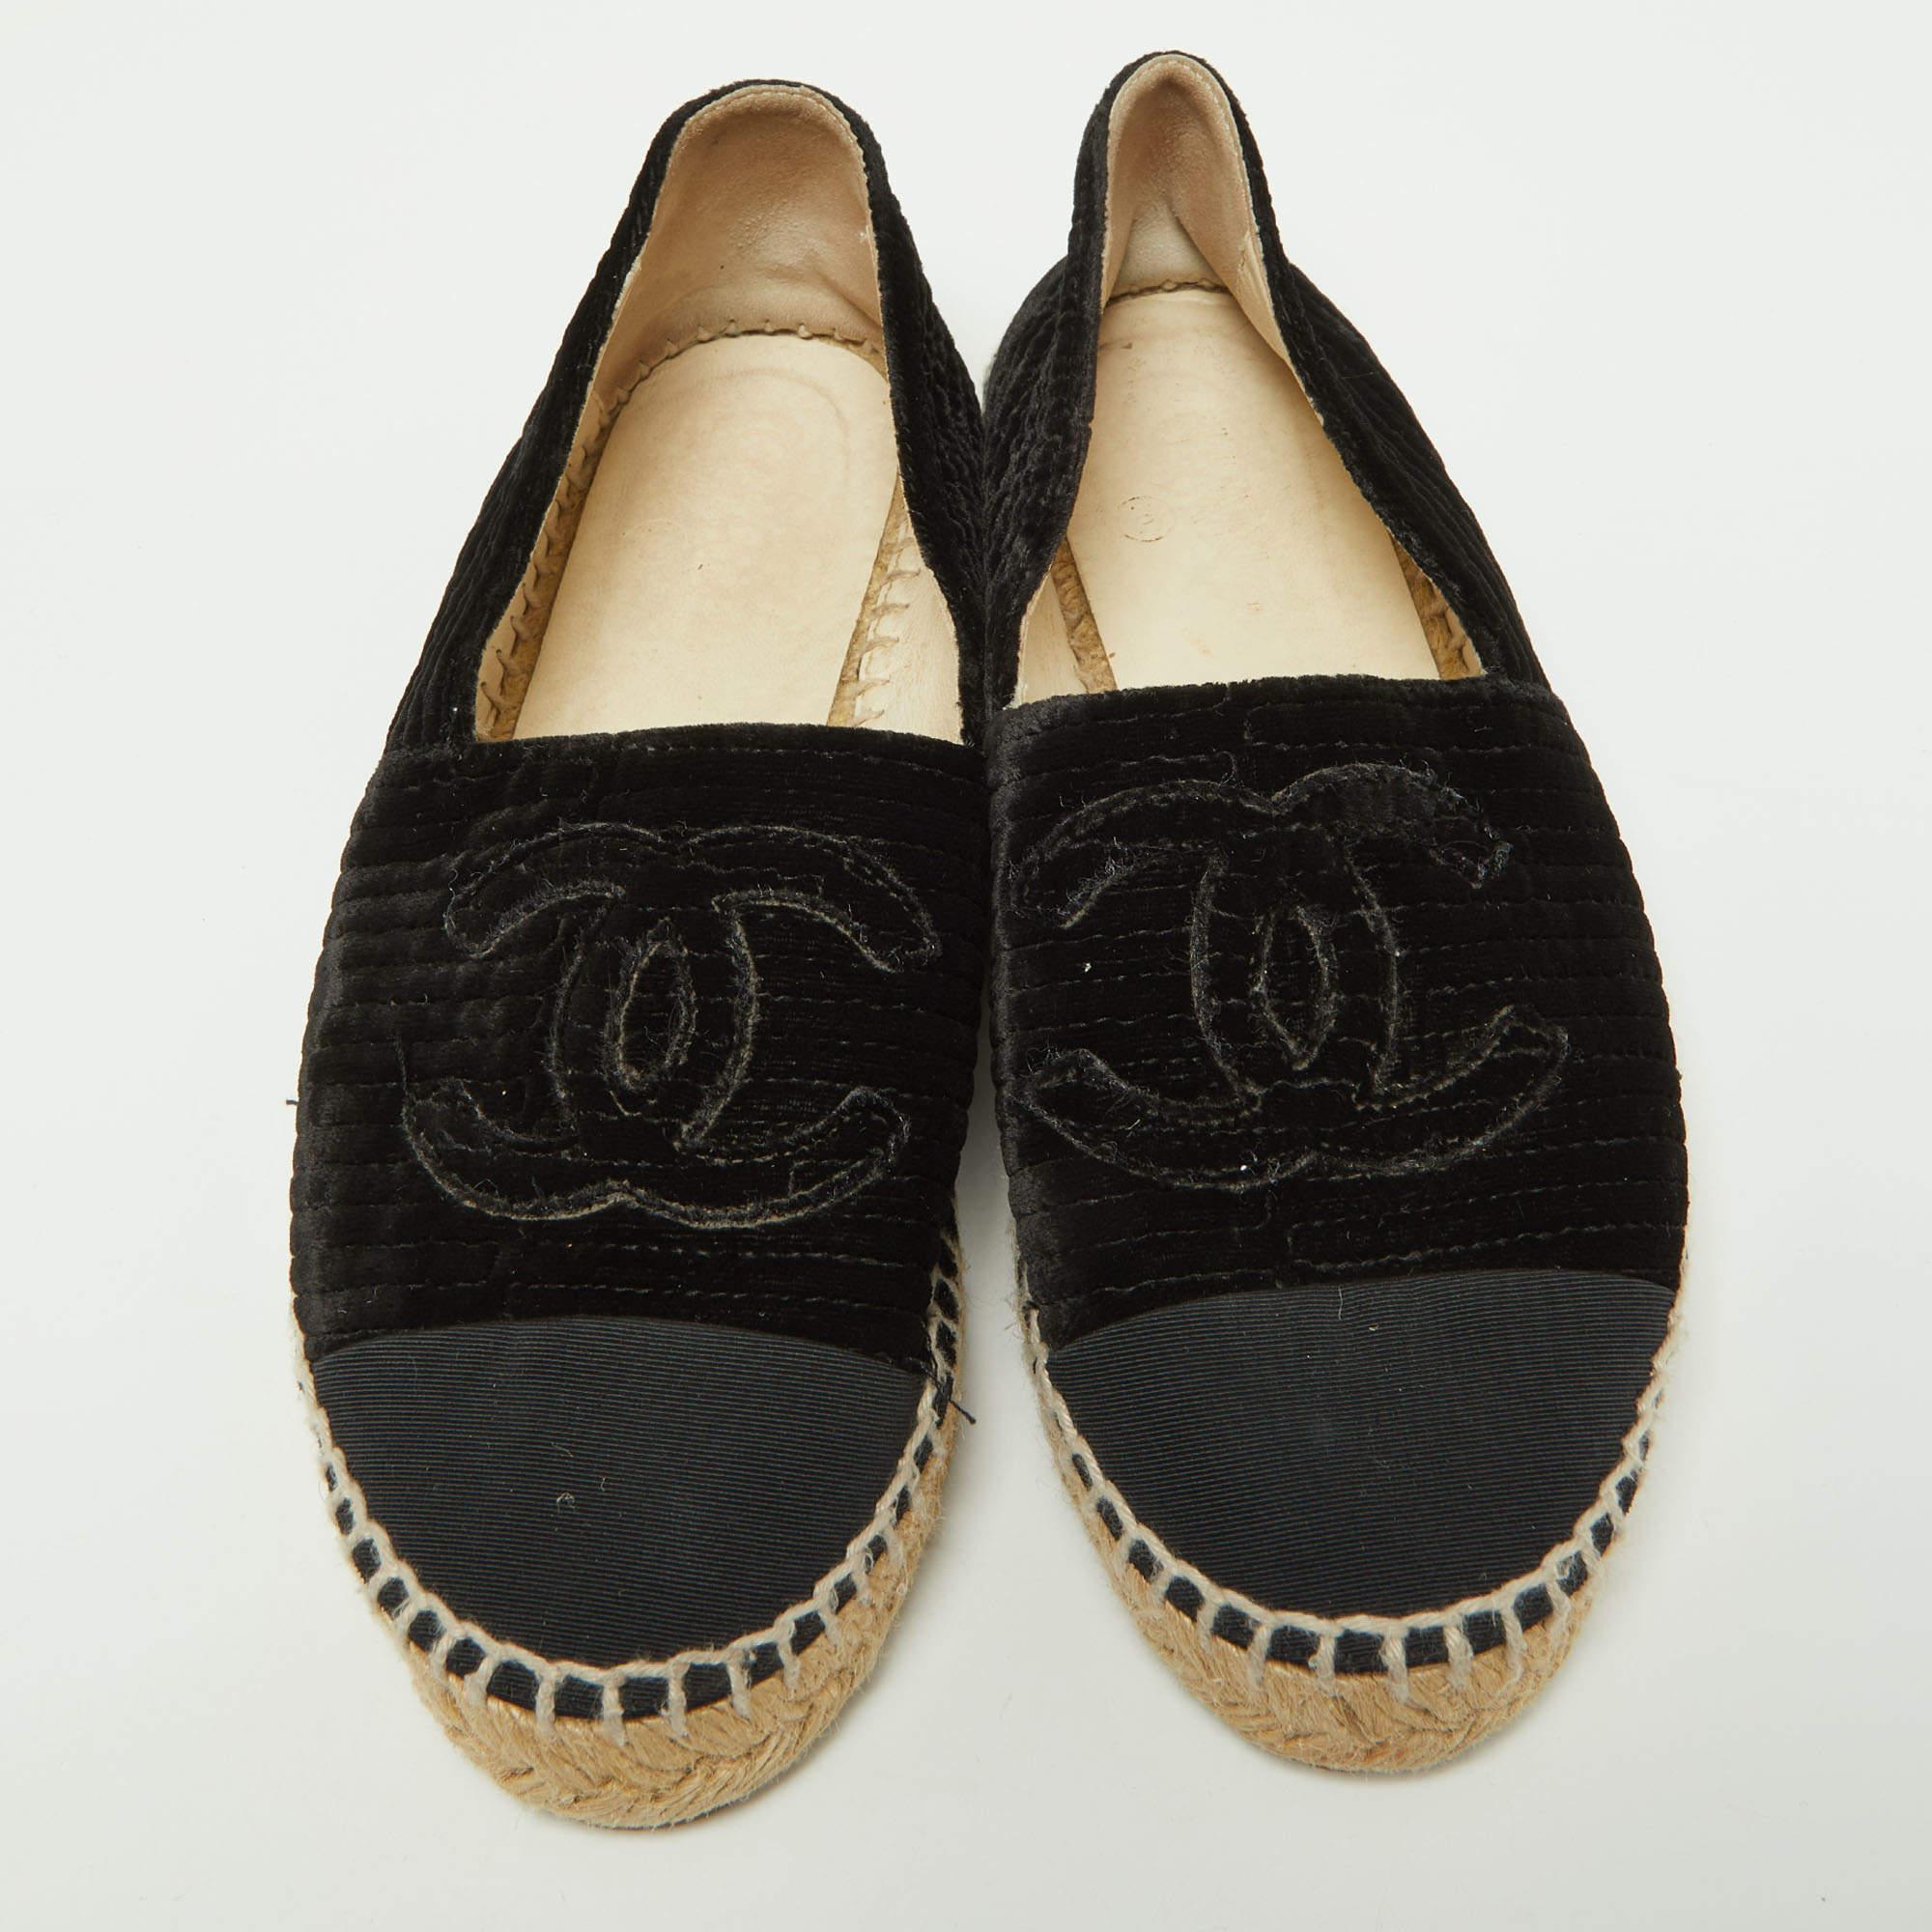 Let this comfortable pair of Chanel espadrilles be your first choice when you're out for a long day. These designer shoes have well-sewn uppers beautifully set on durable soles.

Includes: Original Dustbag

